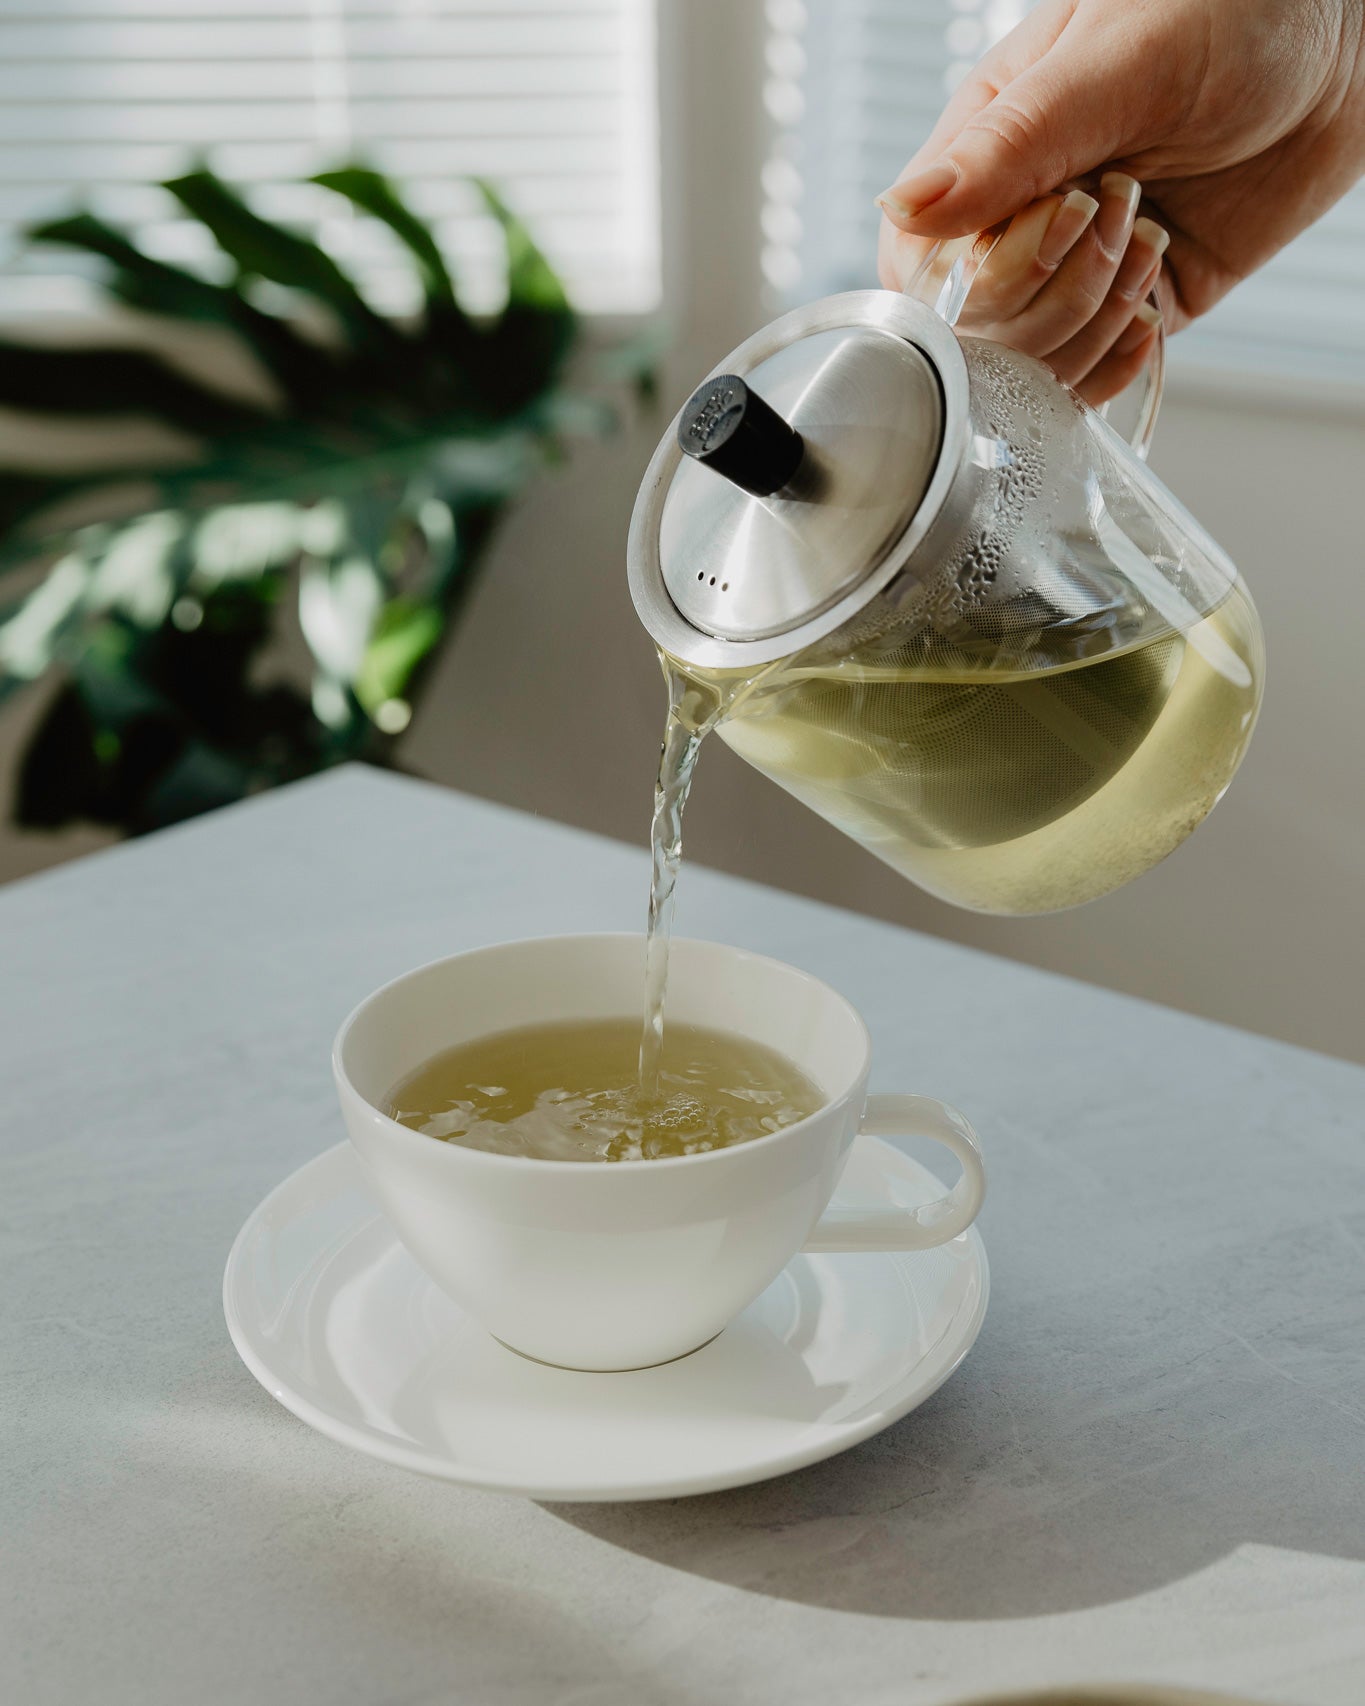 Is Green Tea Good for You?